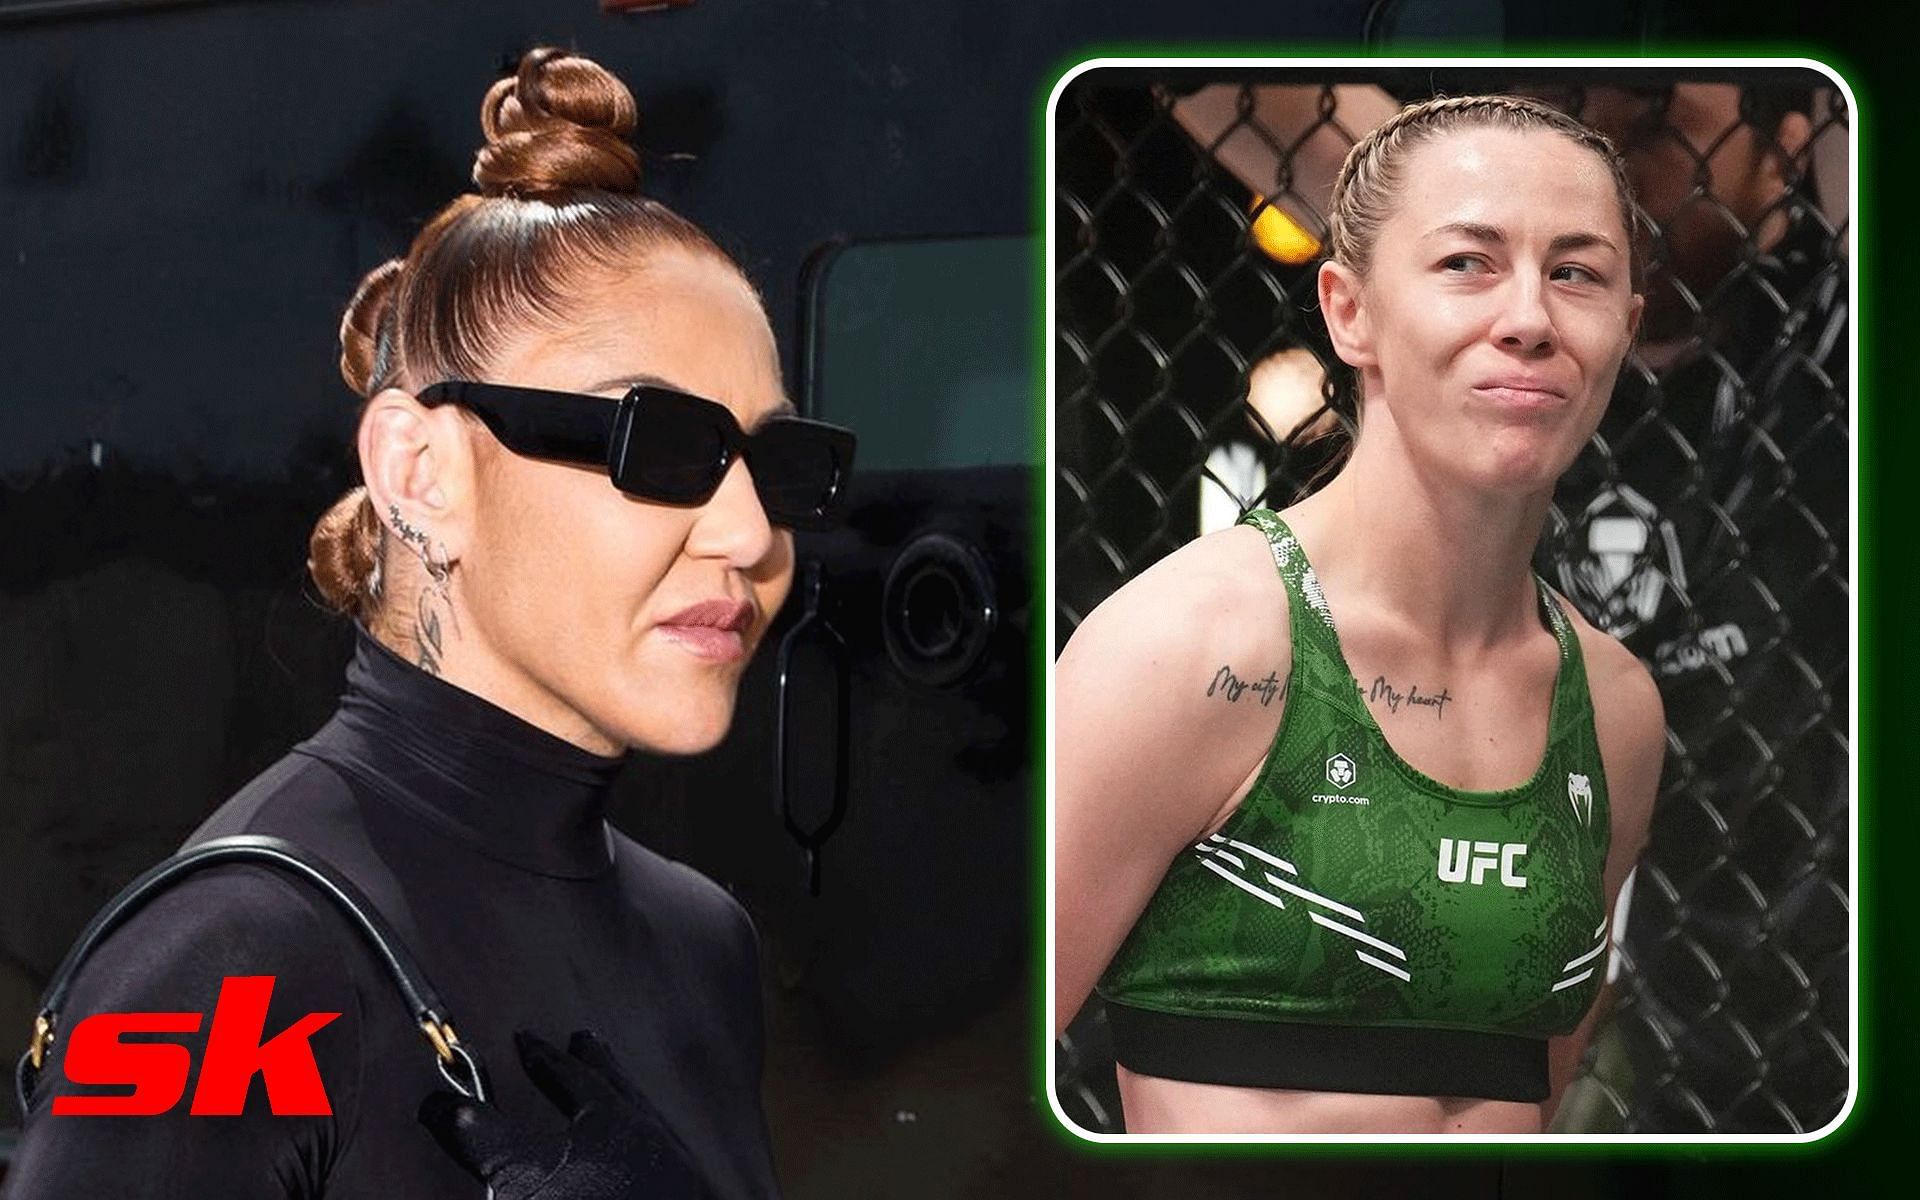 Cris Cyborg (left) foresees a bright future for Molly McCann (right) [Images courtesy: @criscyborg and @meatballmolly on Instagram]